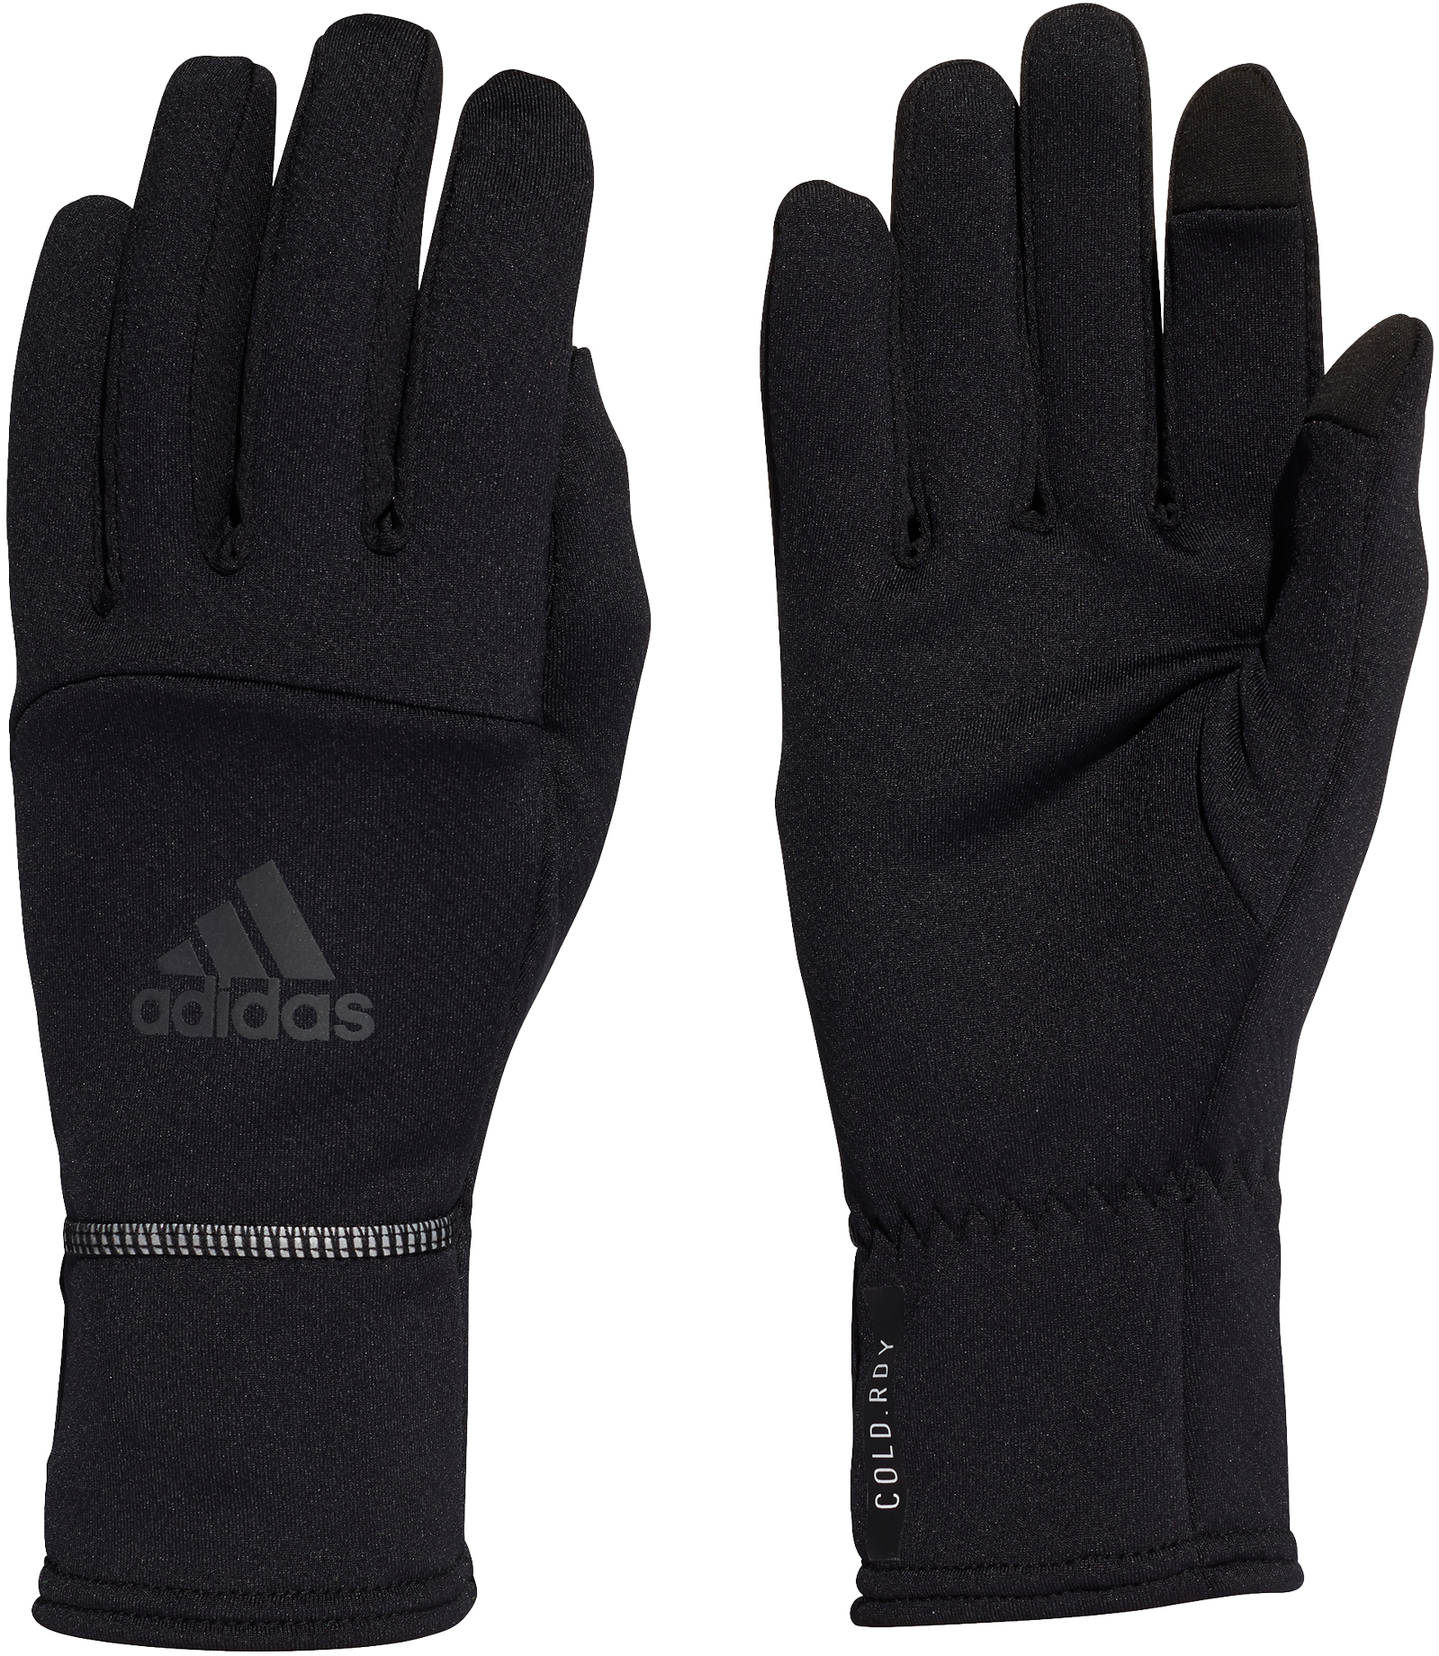 Rukavice adidas GLOVES COLD.RDY